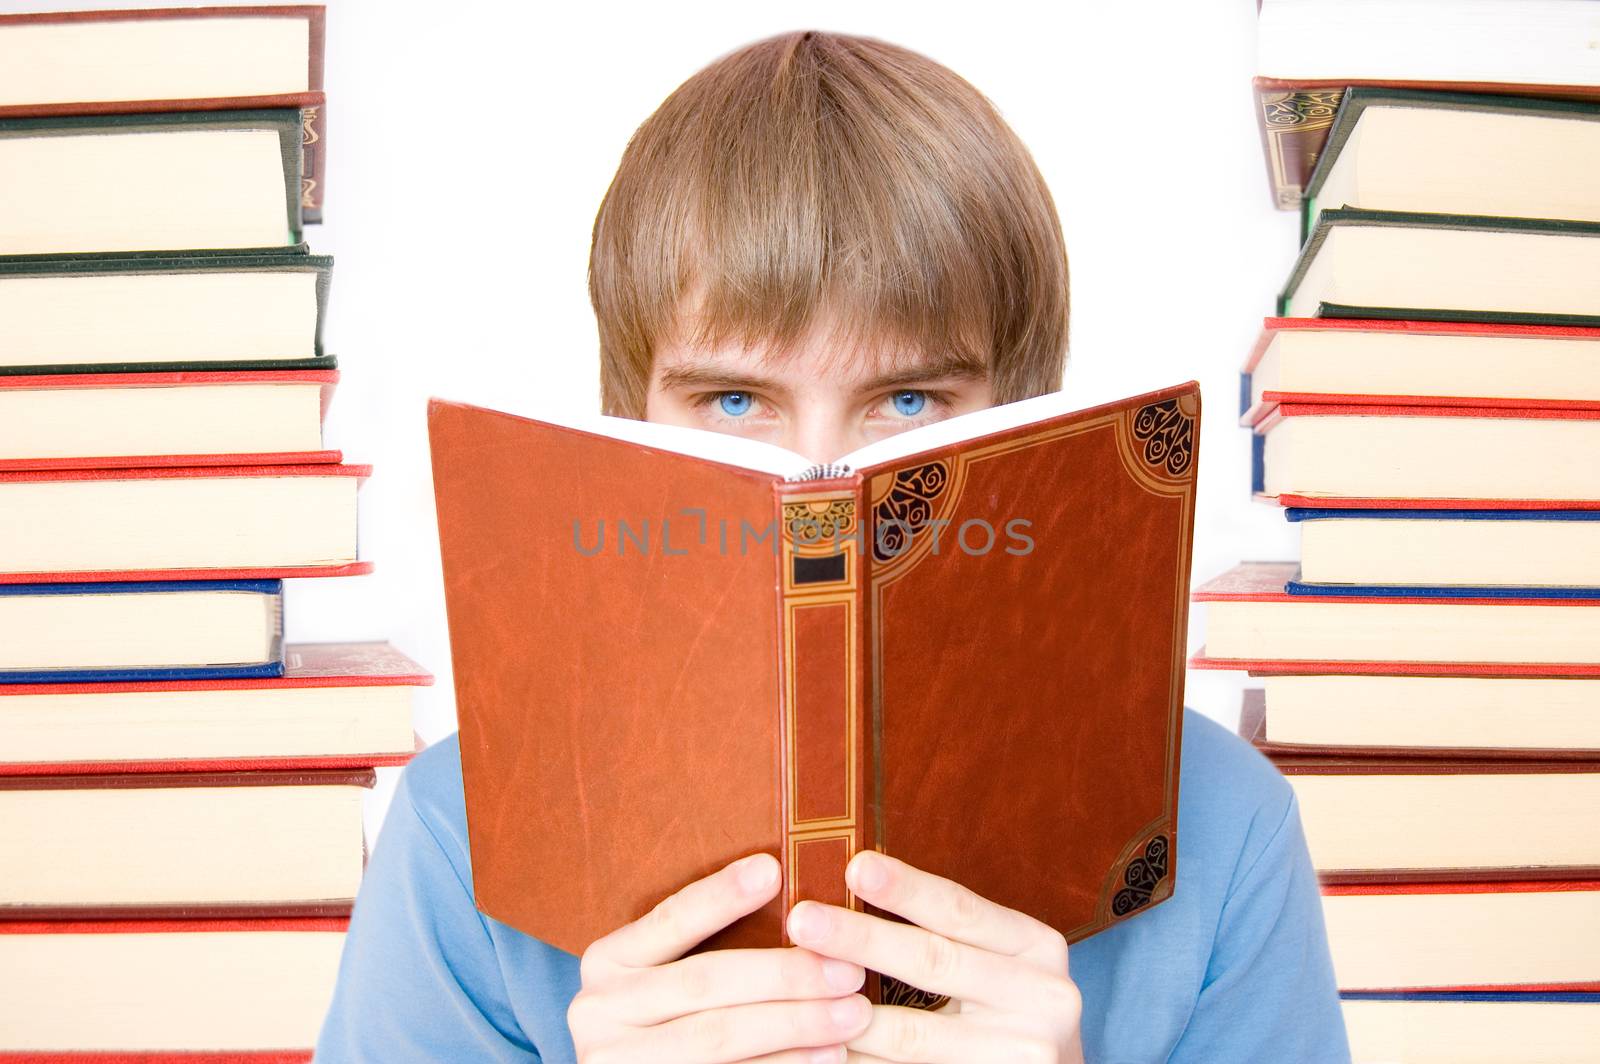 Education conceptual image. Young boy reading and studying between books.